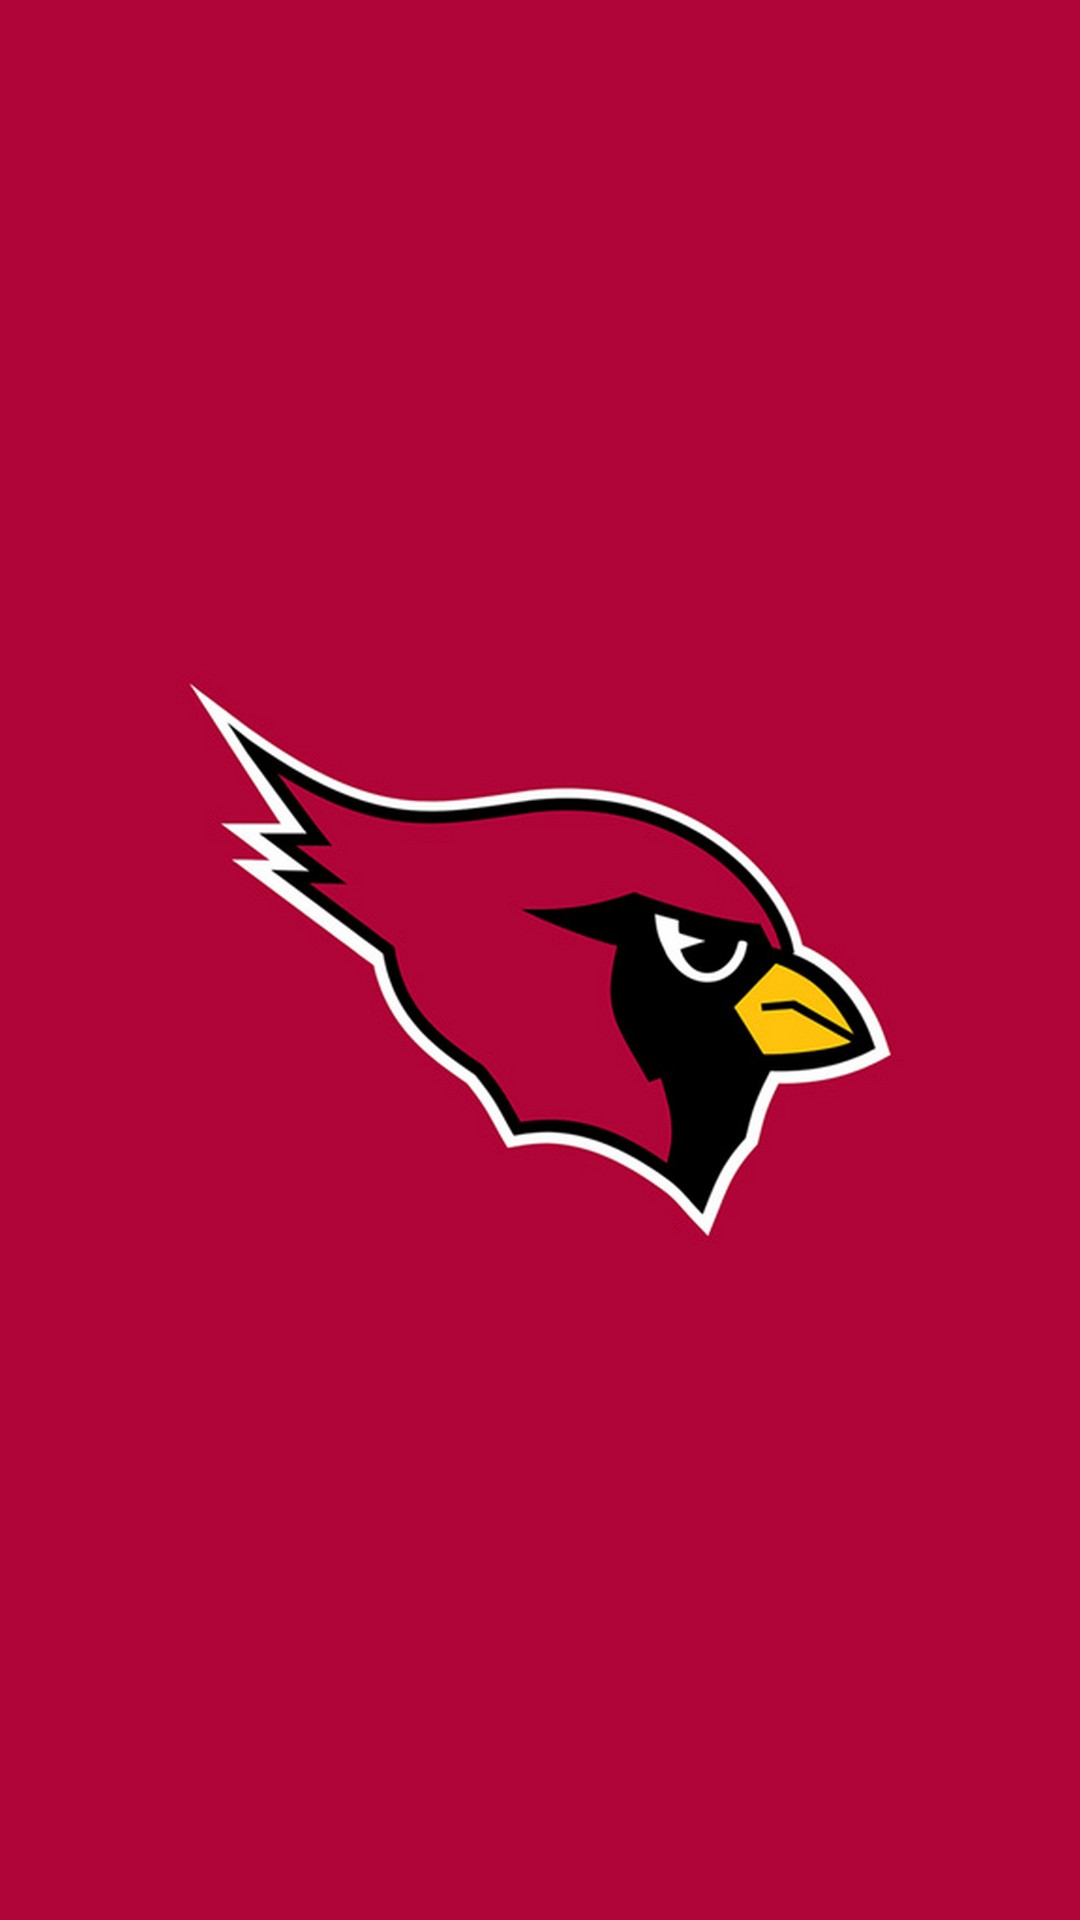 Arizona Cardinals iPhone Wallpaper Design with high-resolution 1080x1920 pixel. Download and set as wallpaper for Apple iPhone X, XS Max, XR, 8, 7, 6, SE, iPad, Android